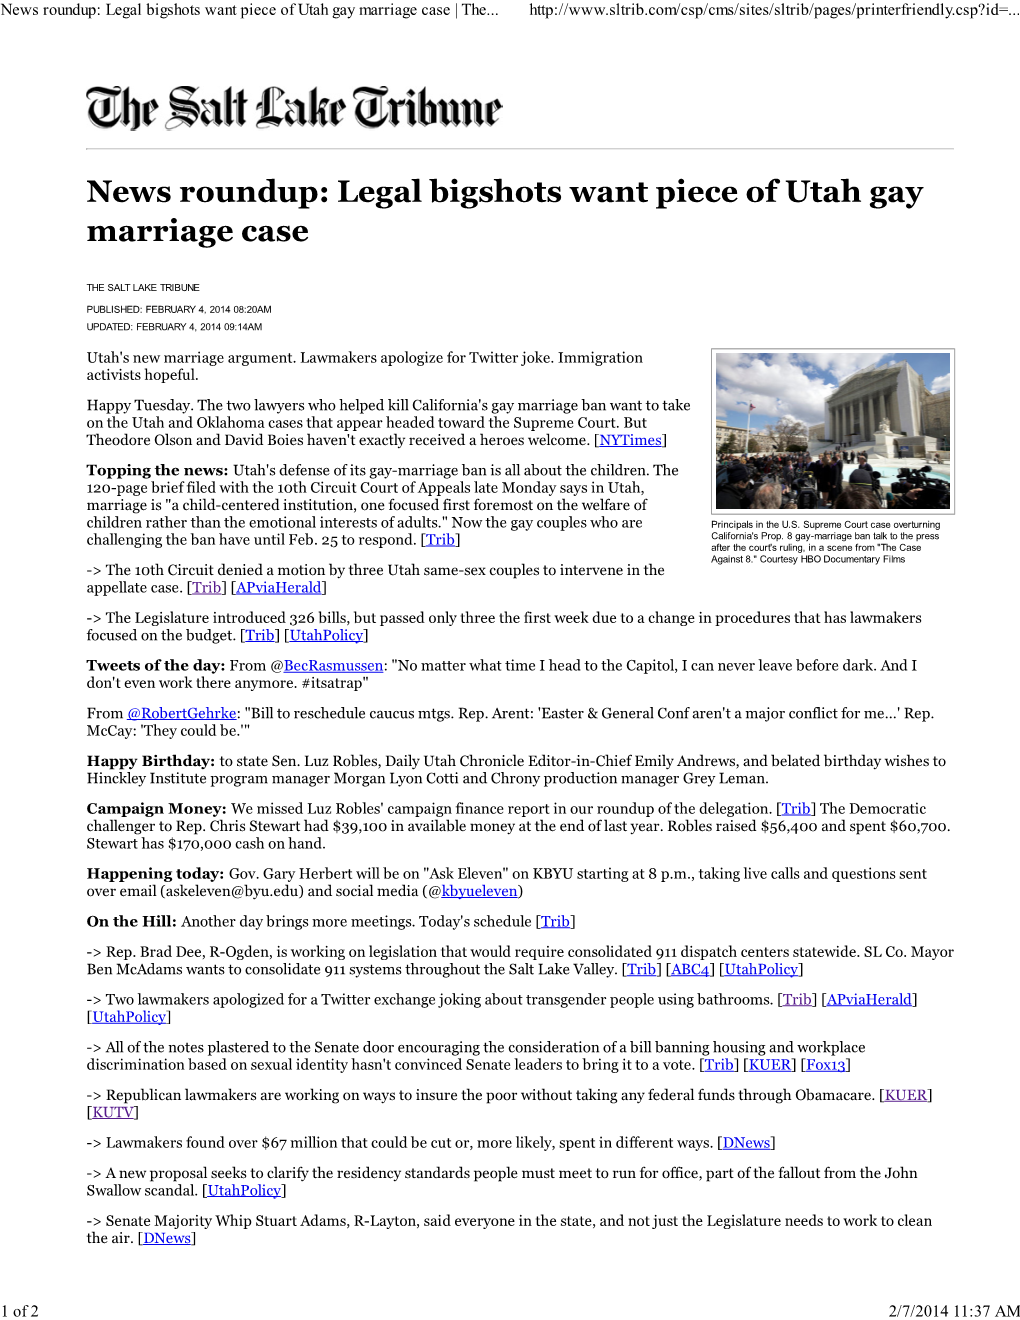 News Roundup: Legal Bigshots Want Piece of Utah Gay Marriage Case | The